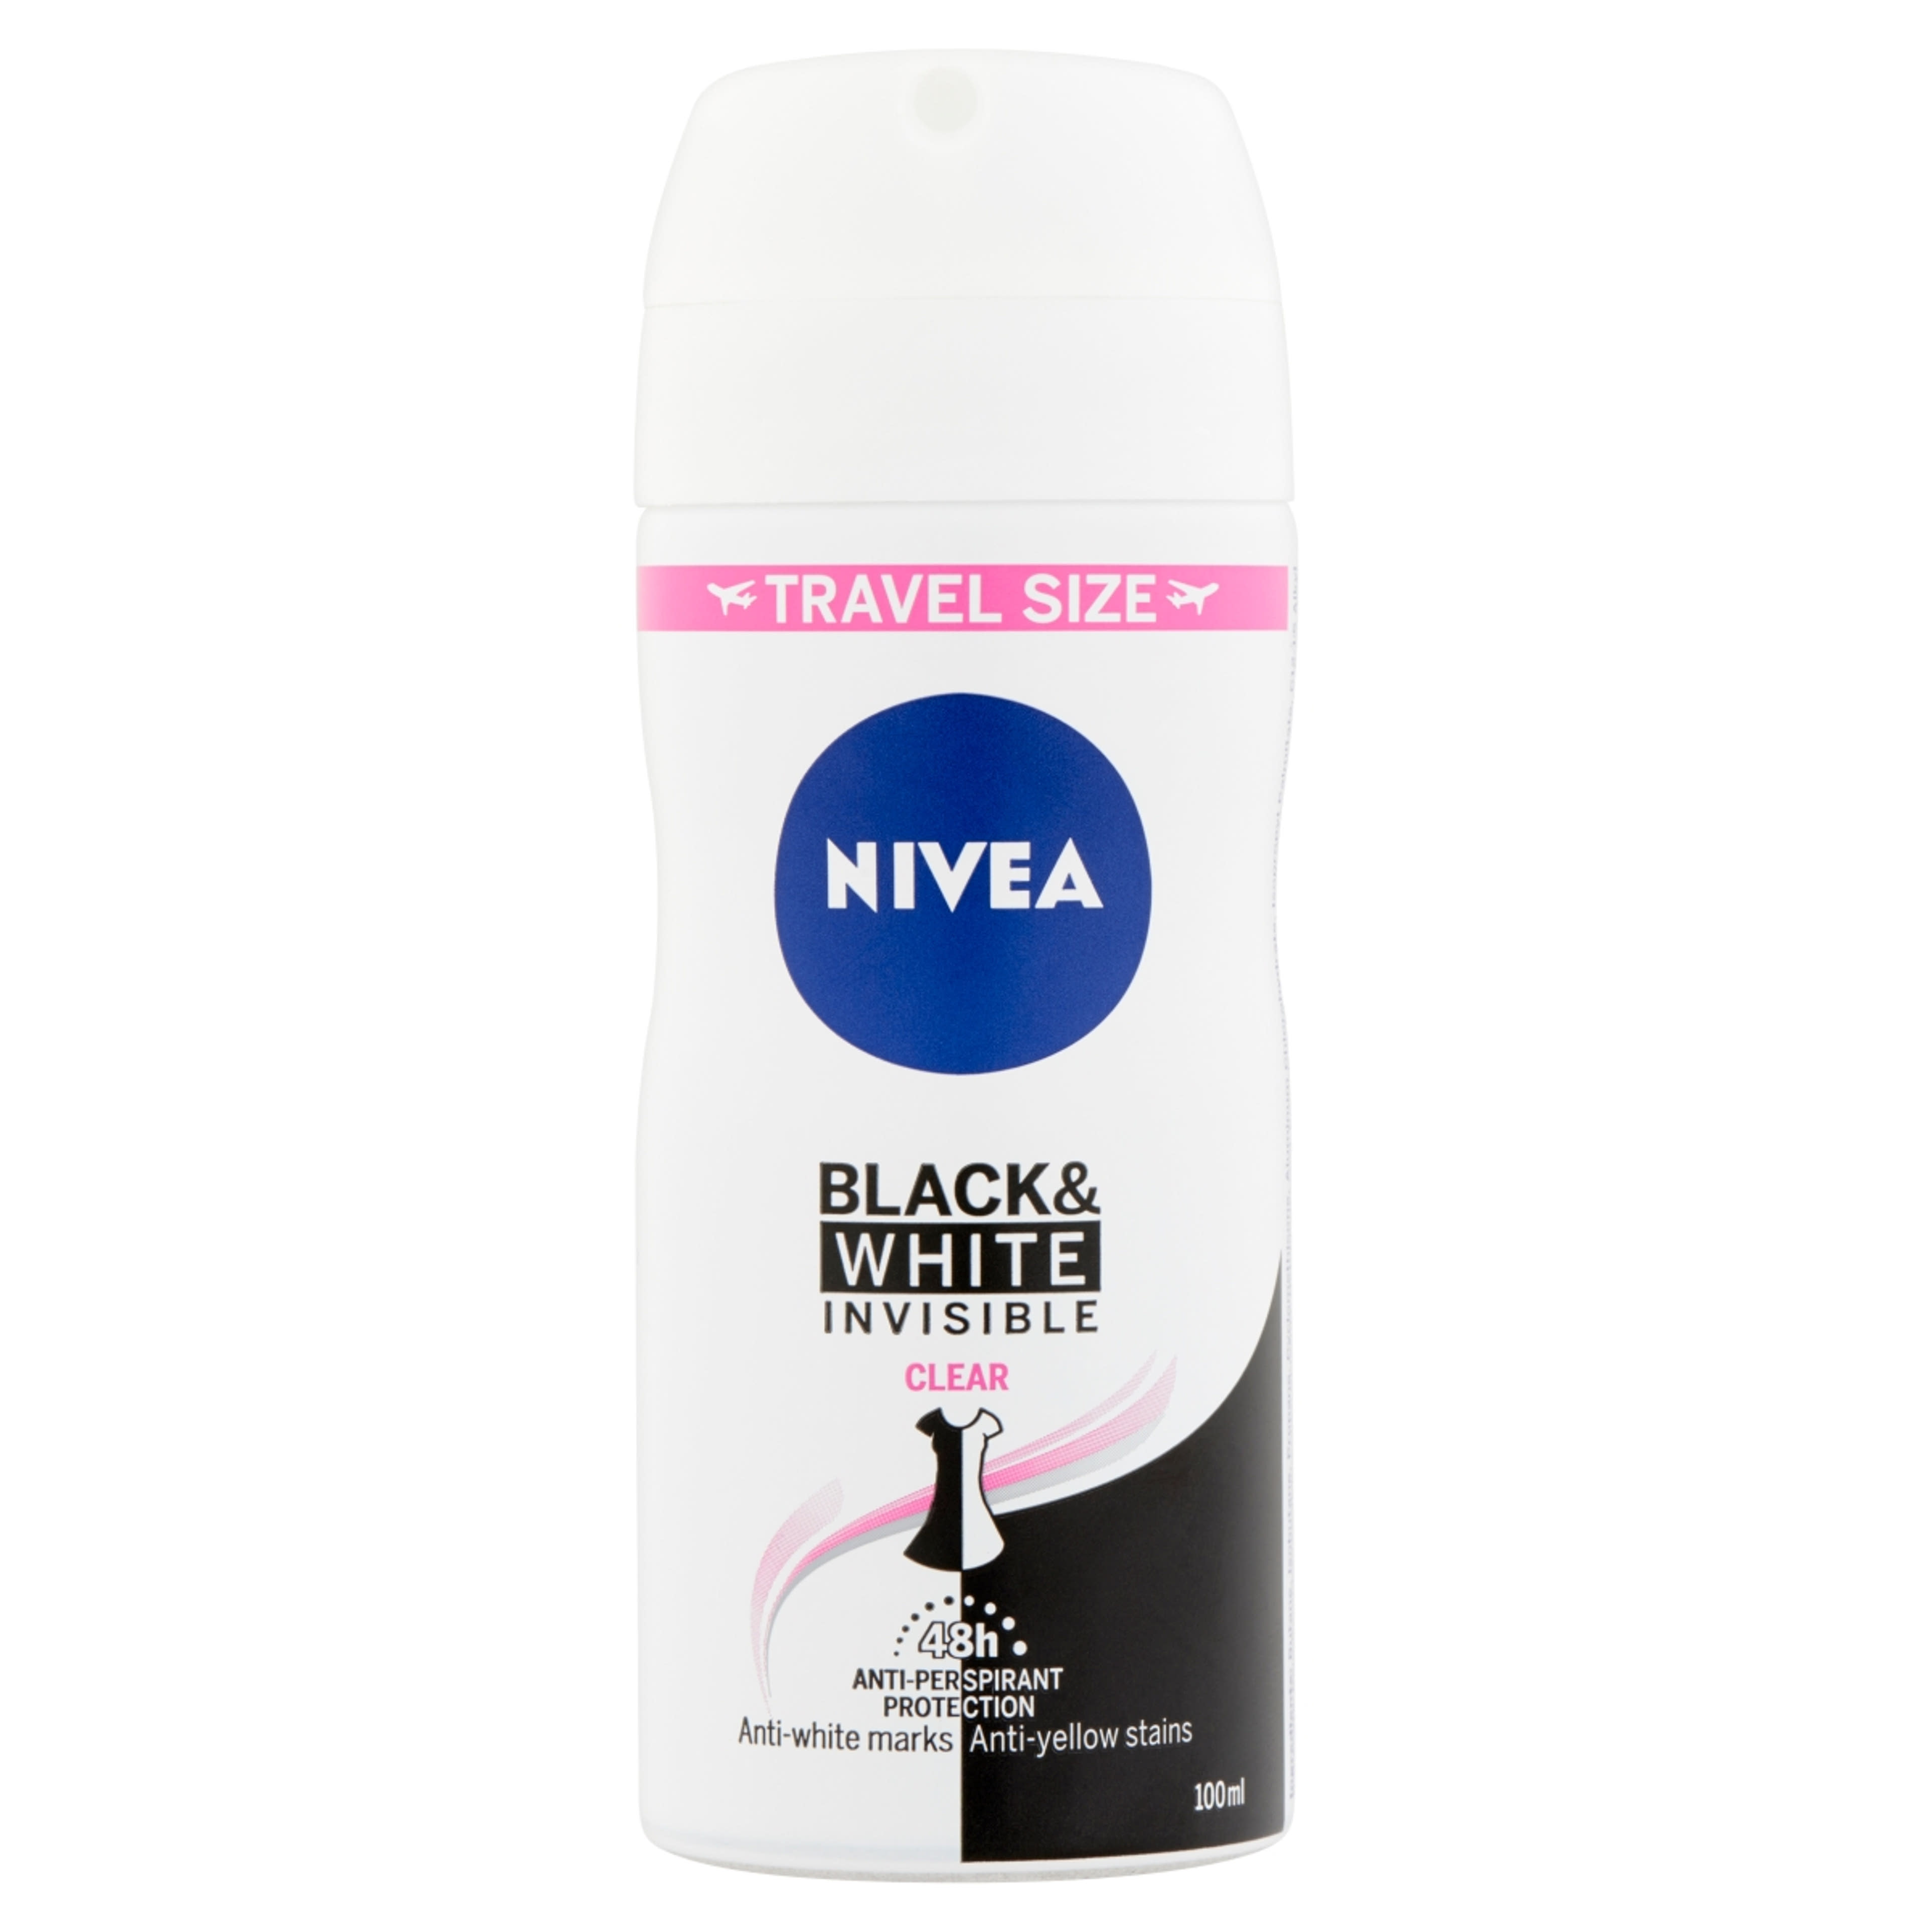 NIVEA Deo spray for Black & White Invisible Clear Pocket Size - 100 ml-1